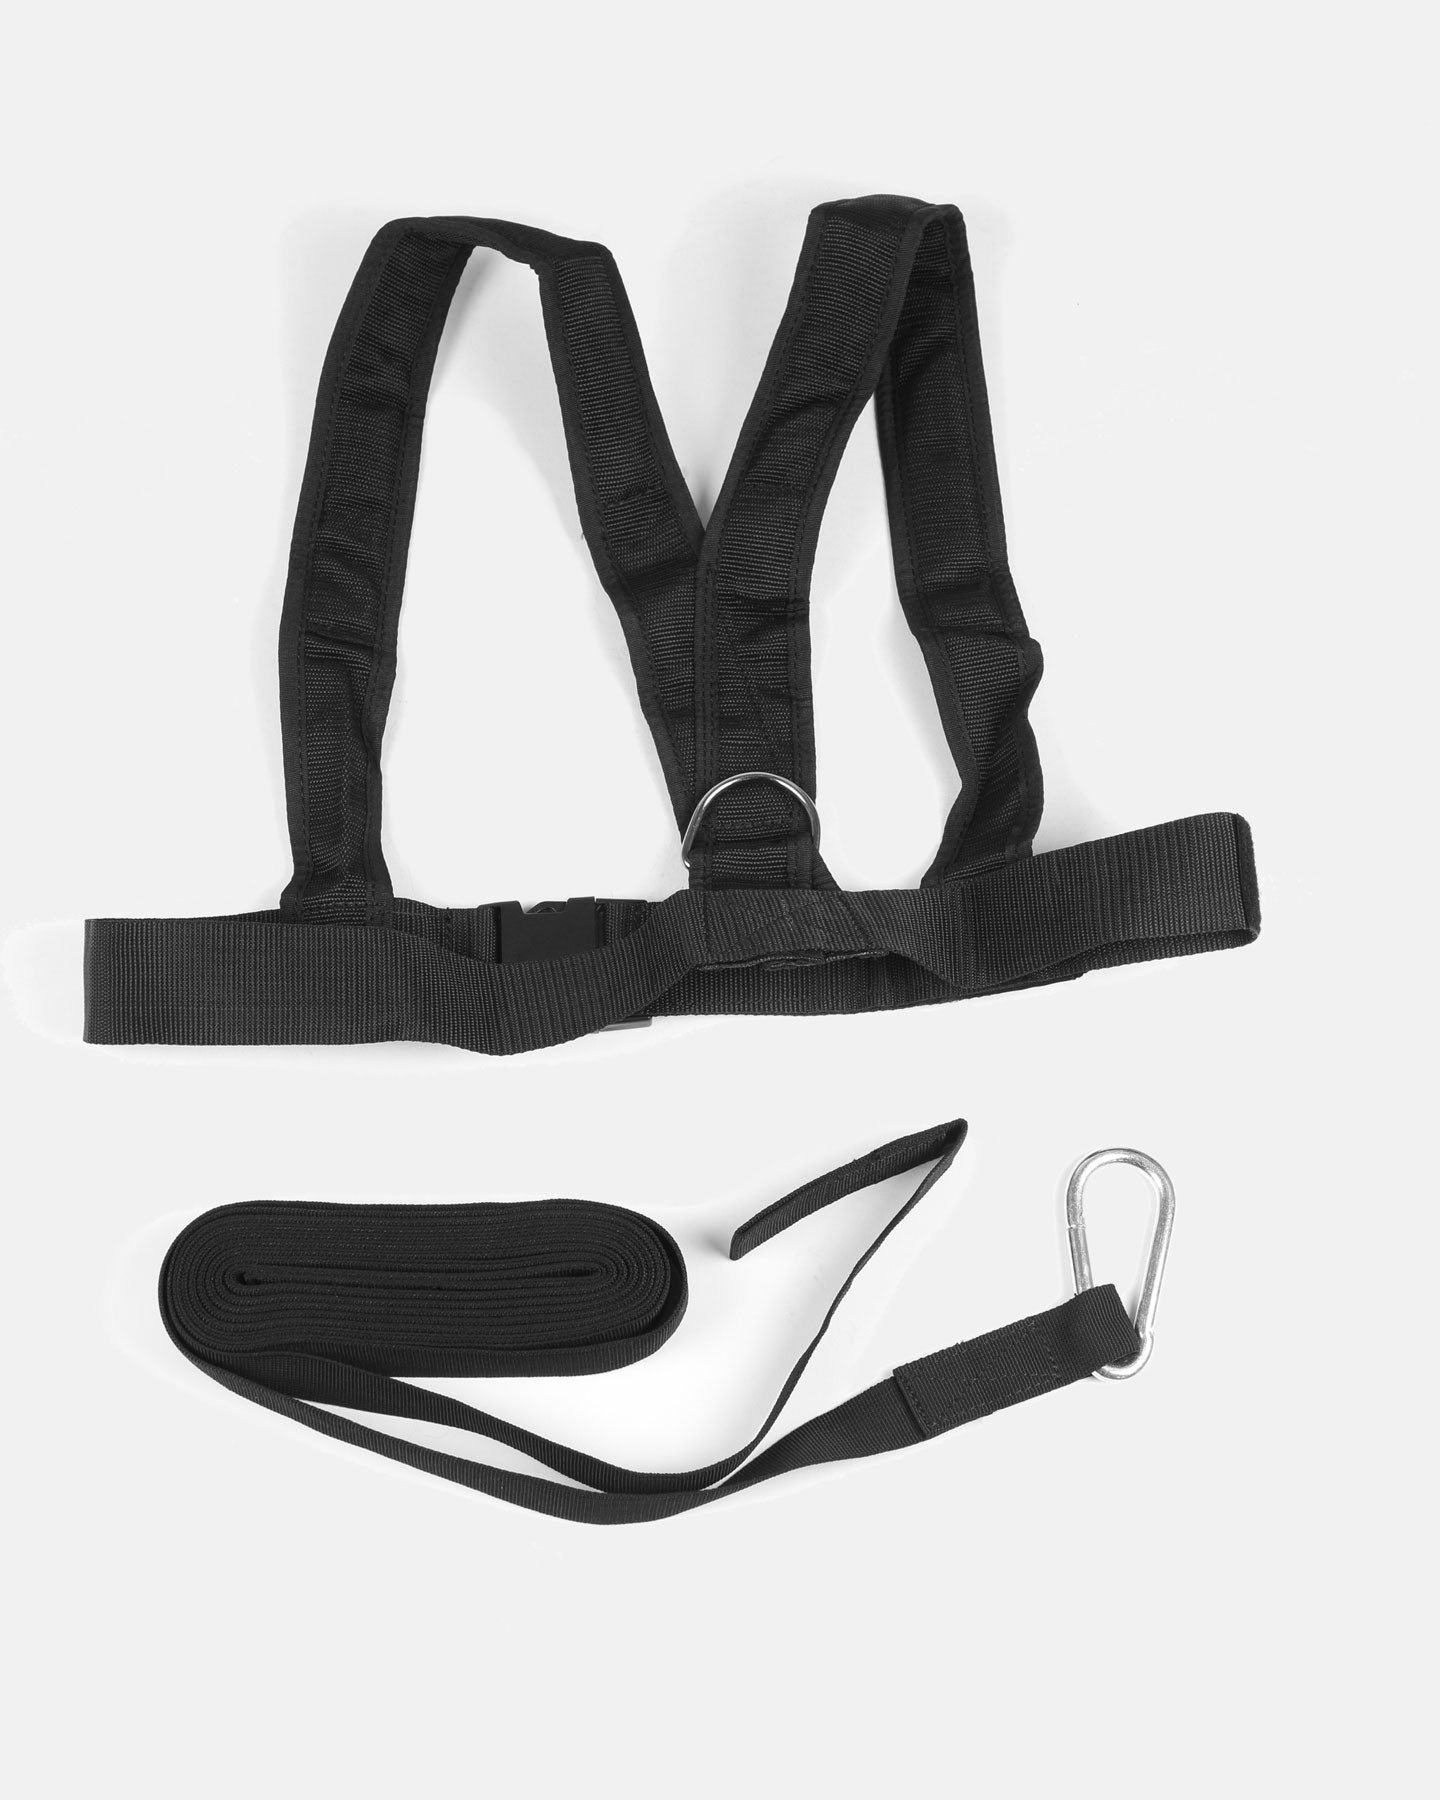 universal harness for sled